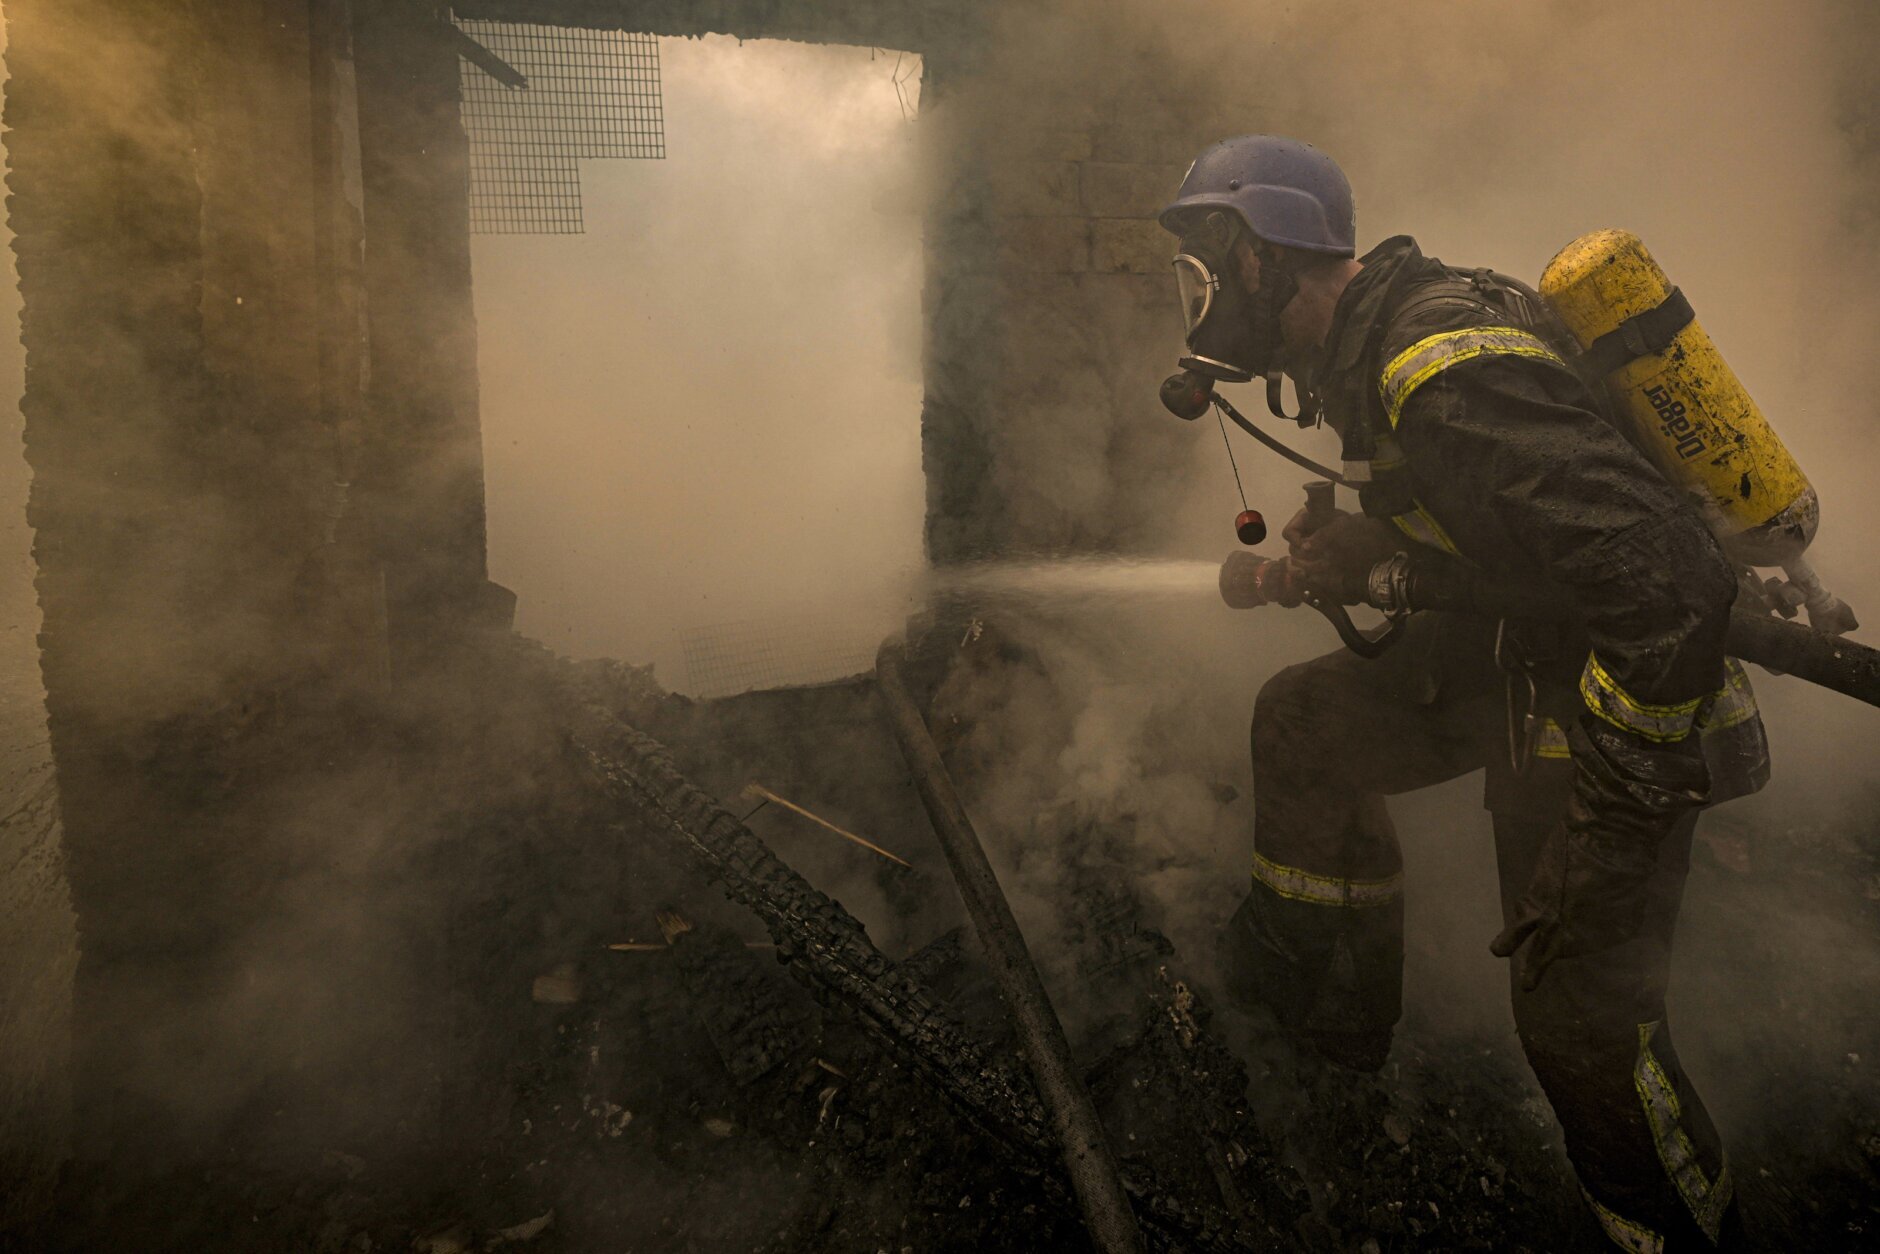 A Ukrainian firefighter sprays water inside a house destroyed by shelling, in Kyiv, Ukraine,Wednesday, March 23, 2022. The Kyiv city administration says Russian forces shelled the Ukrainian capital overnight and early Wednesday morning, in the districts of Sviatoshynskyi and Shevchenkivskyi, damaging buildings. (AP Photo/Vadim Ghirda)